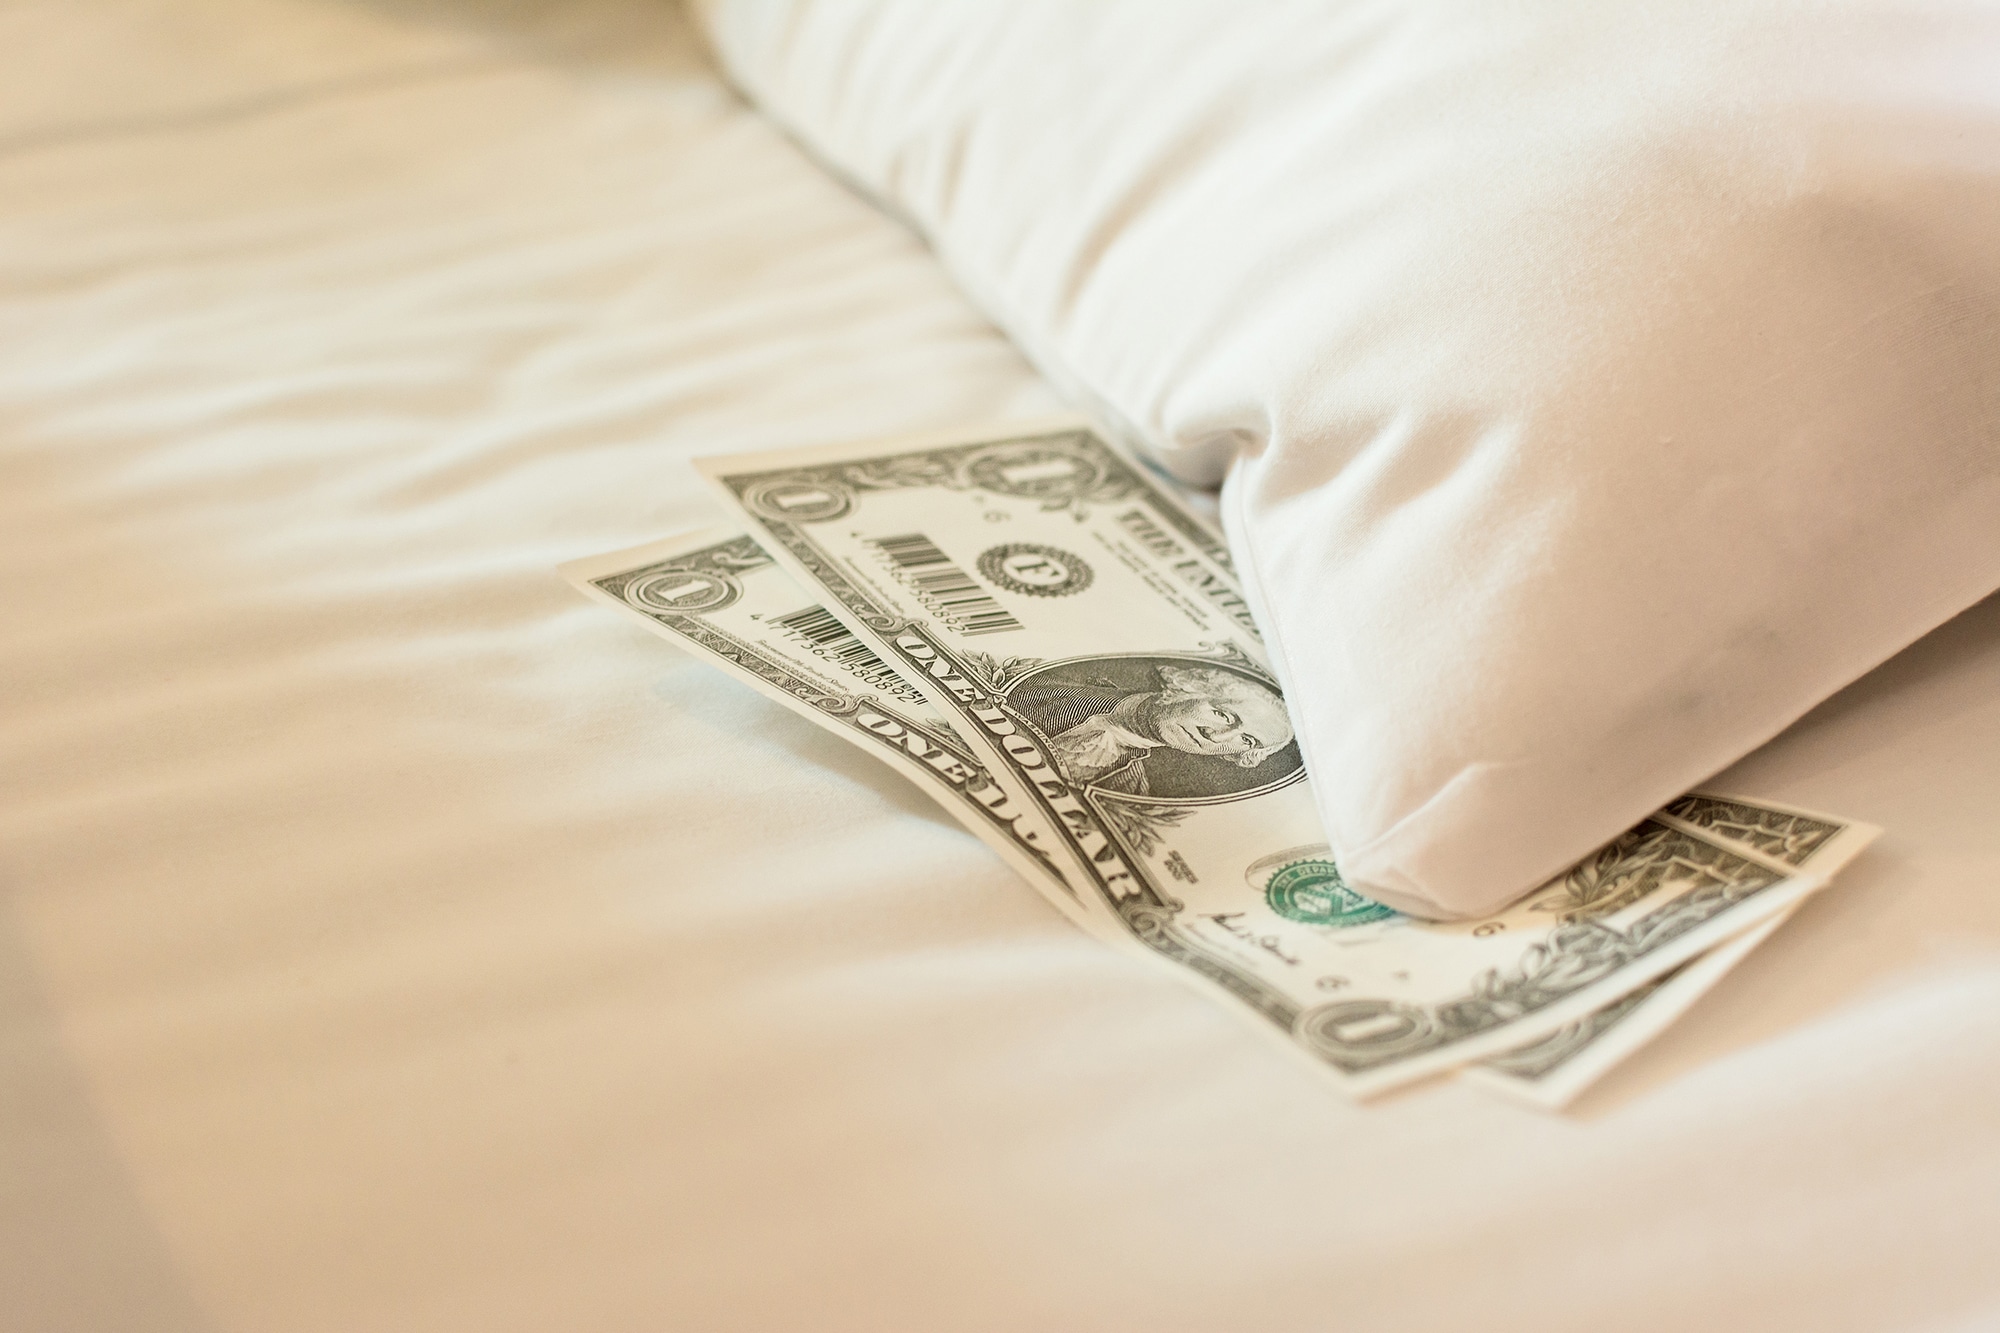 cash on the hotel bed